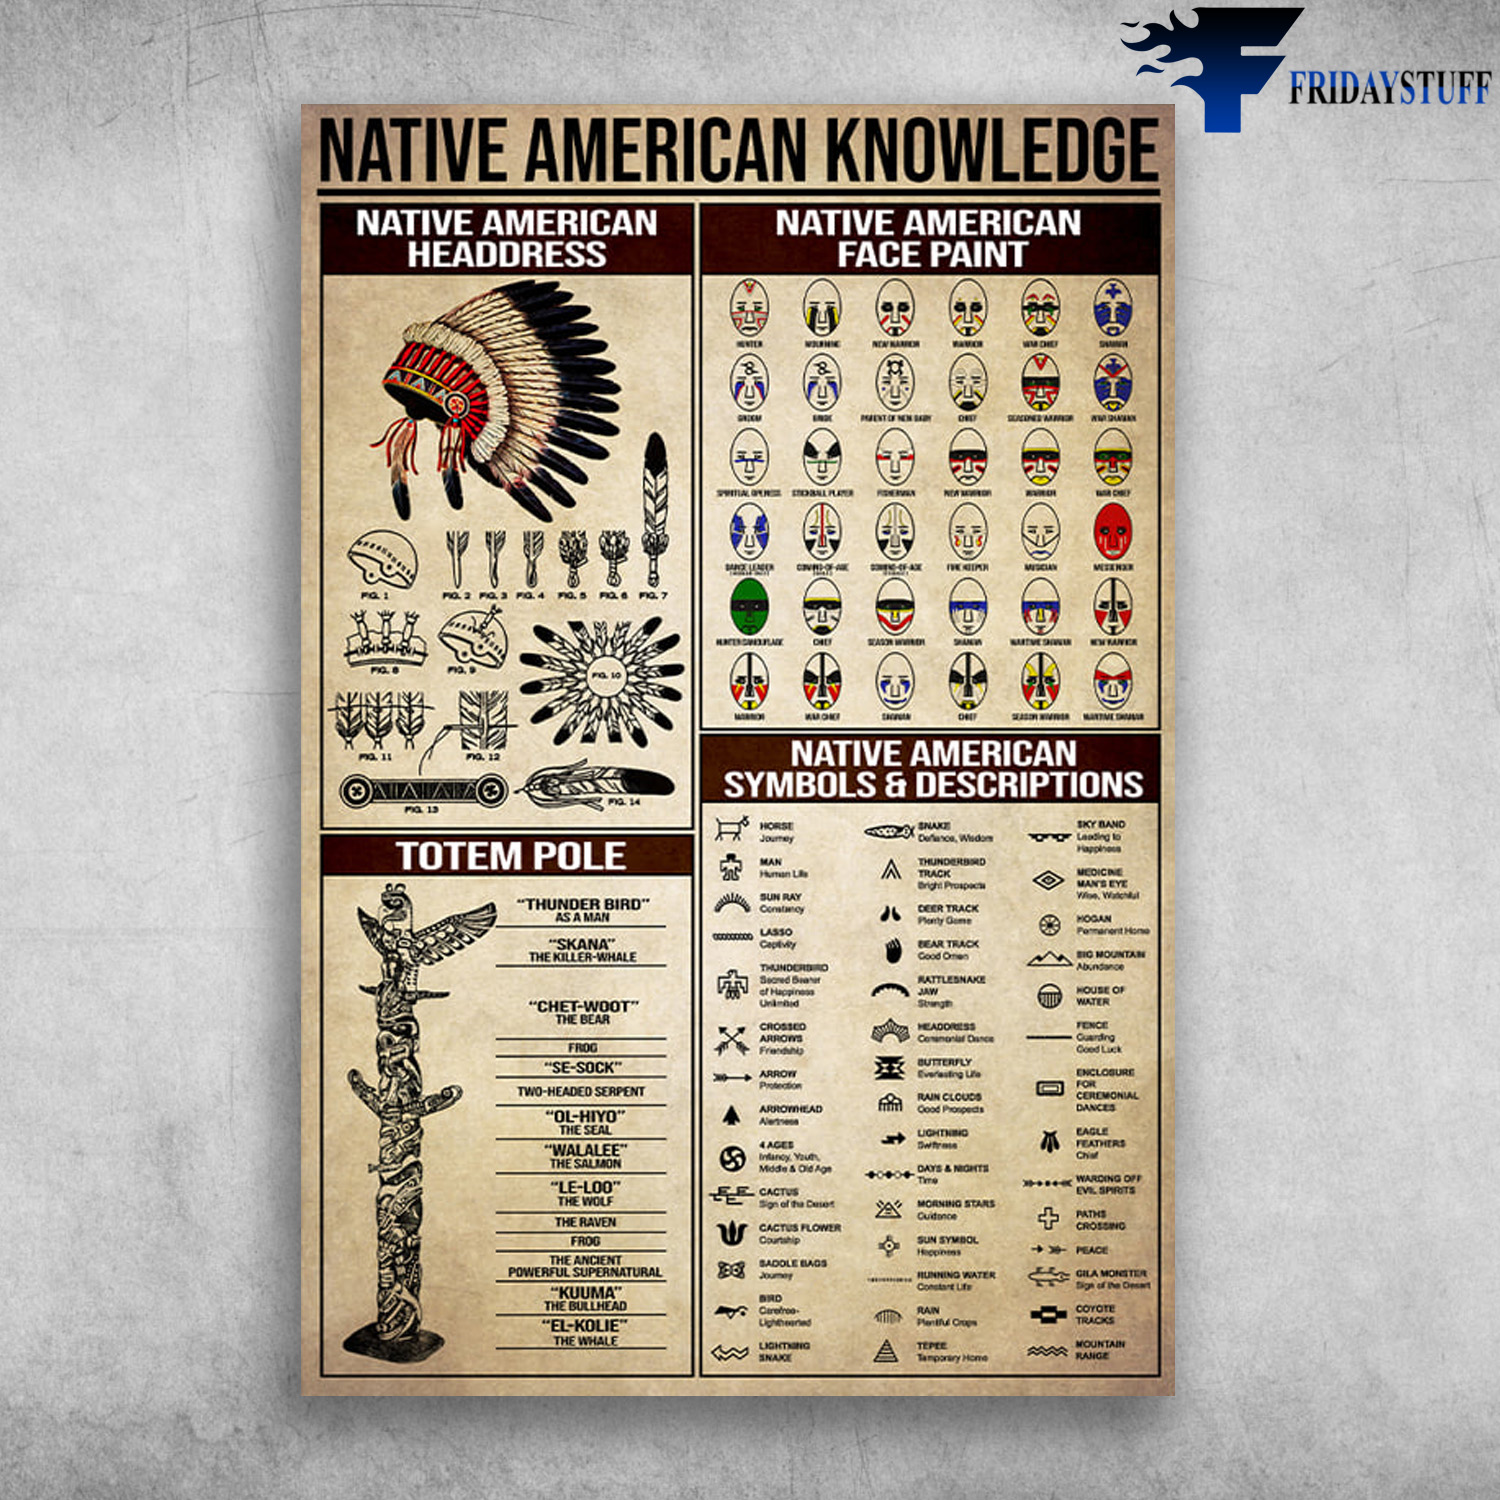 Native American Knowledge - Native American Headdress, Native American Face Paint, Totem Pole, Native American Symbol And Descriptions